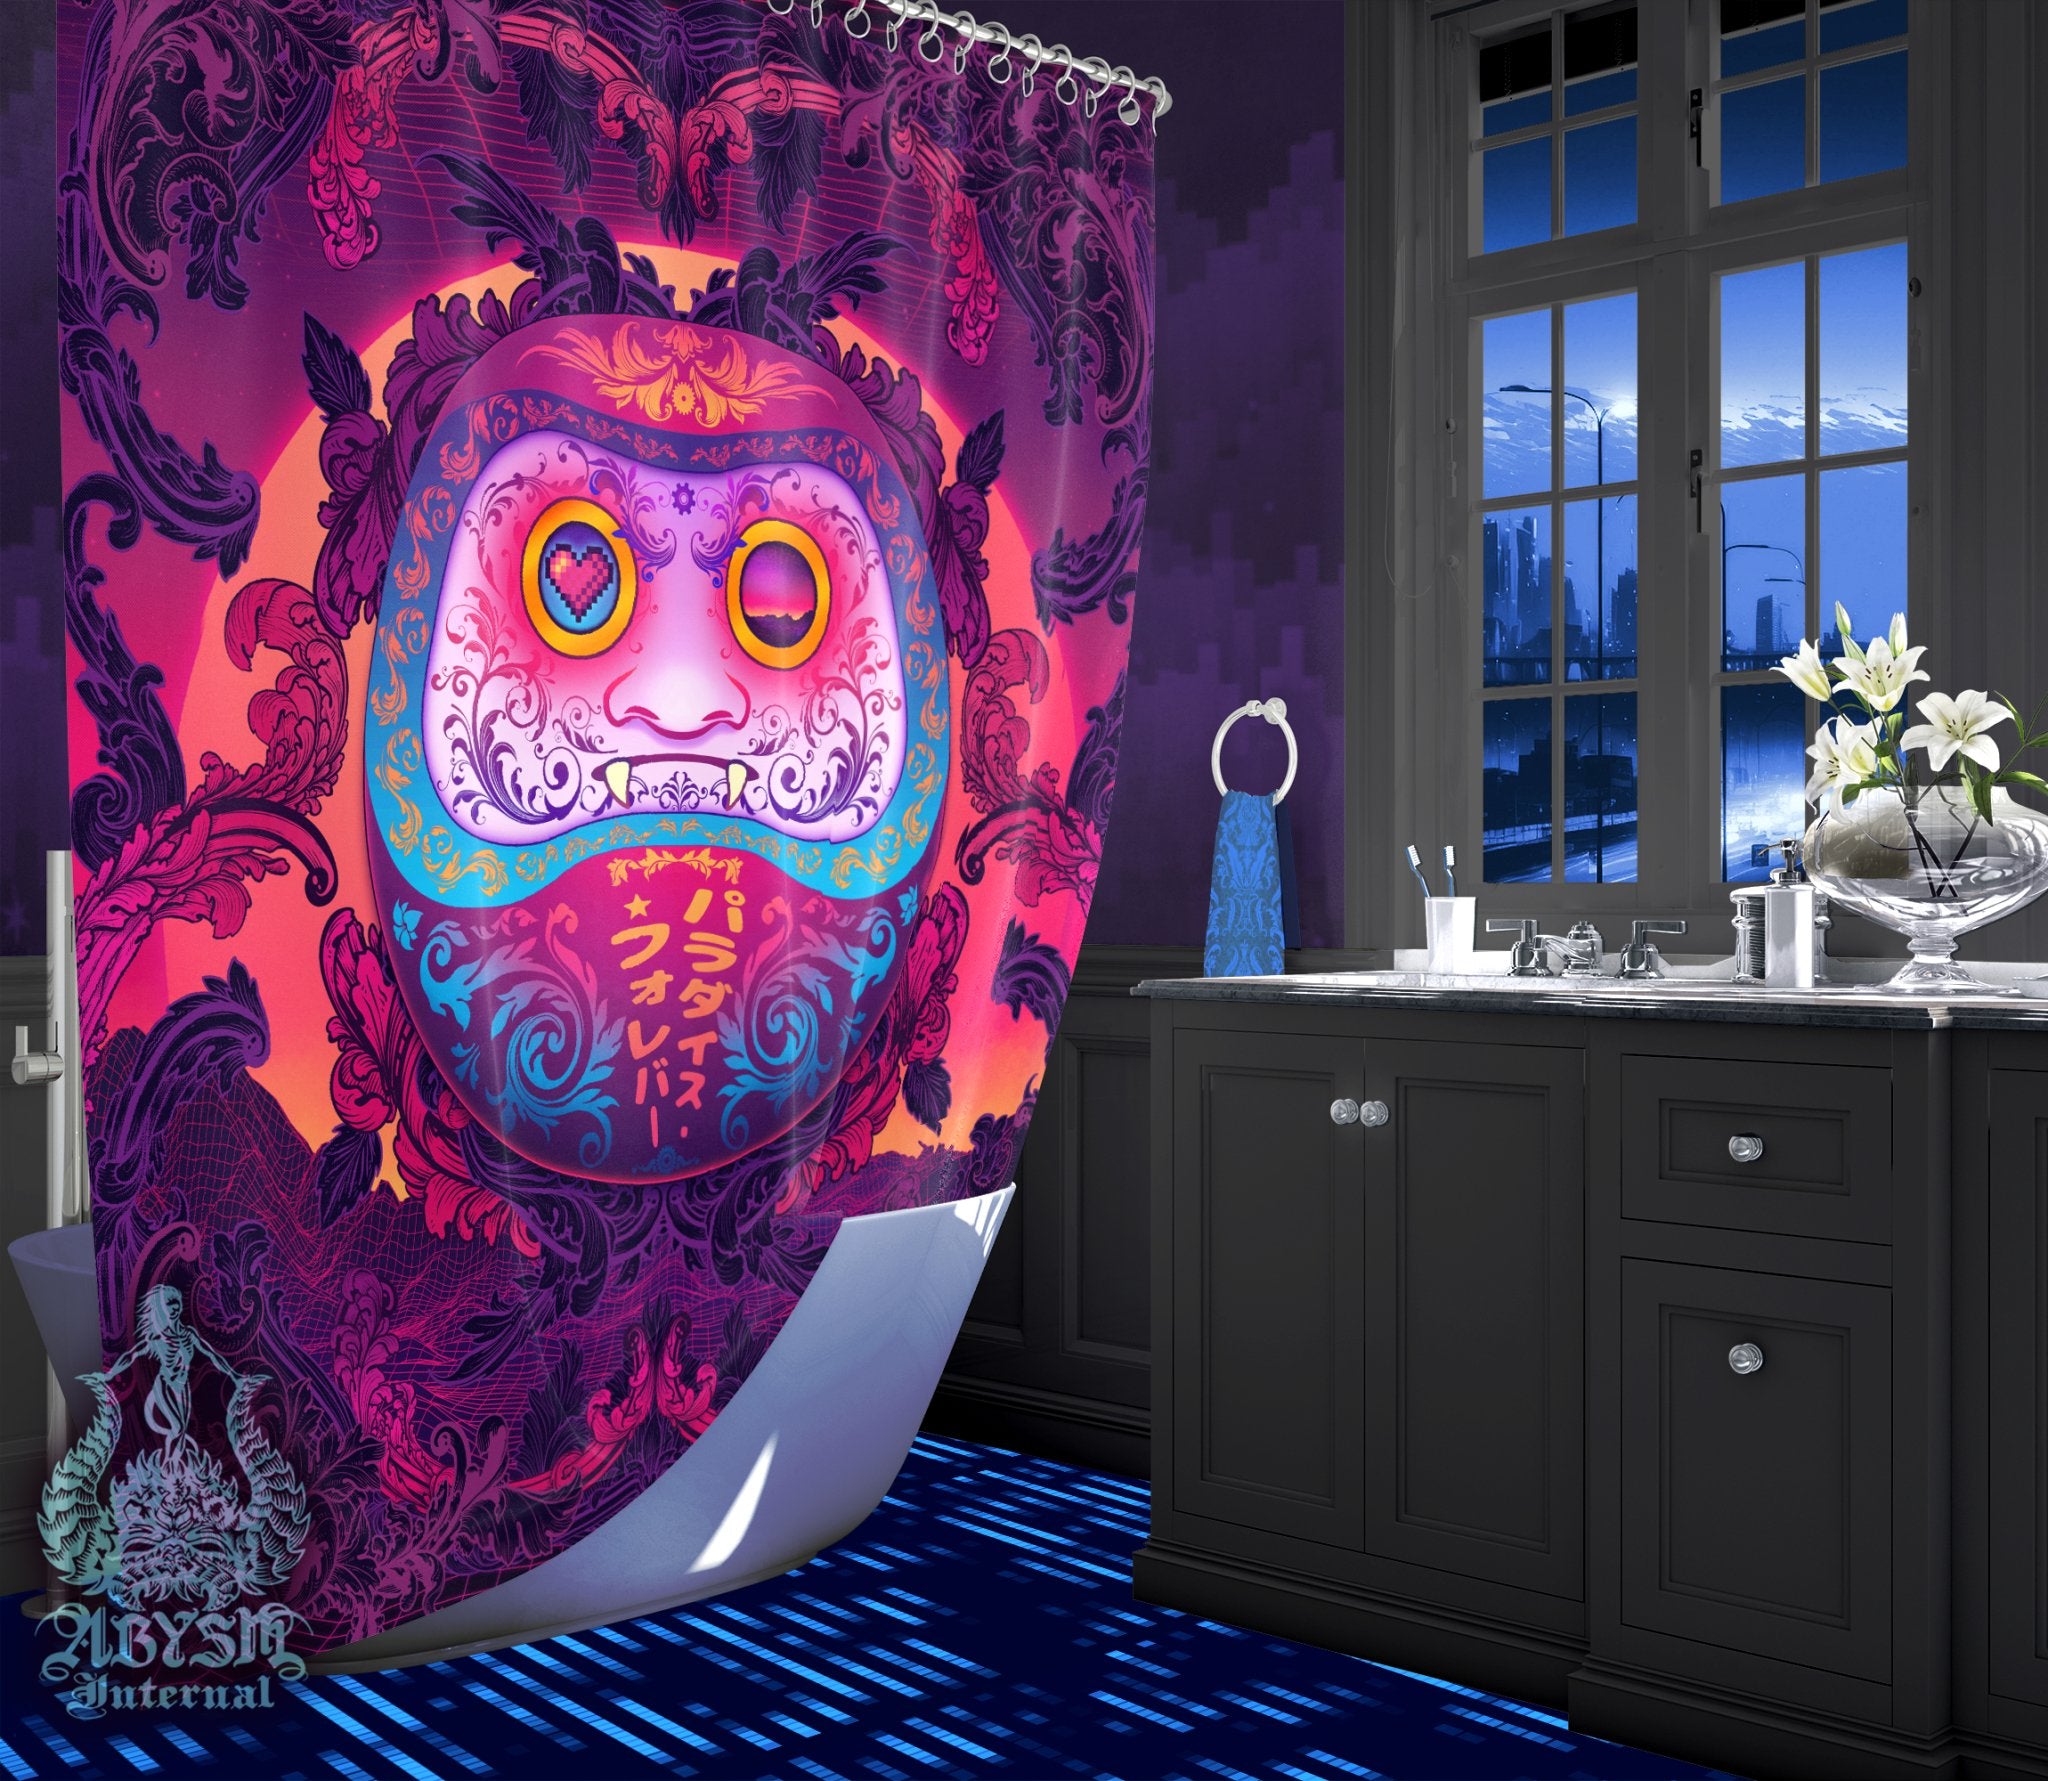 Japanese Vaporwave Shower Curtain, 71x74 inches, Synthwave Bathroom Decor, Psychedelic and Retrowave Home Art, 80s Anime - Daruma - Abysm Internal